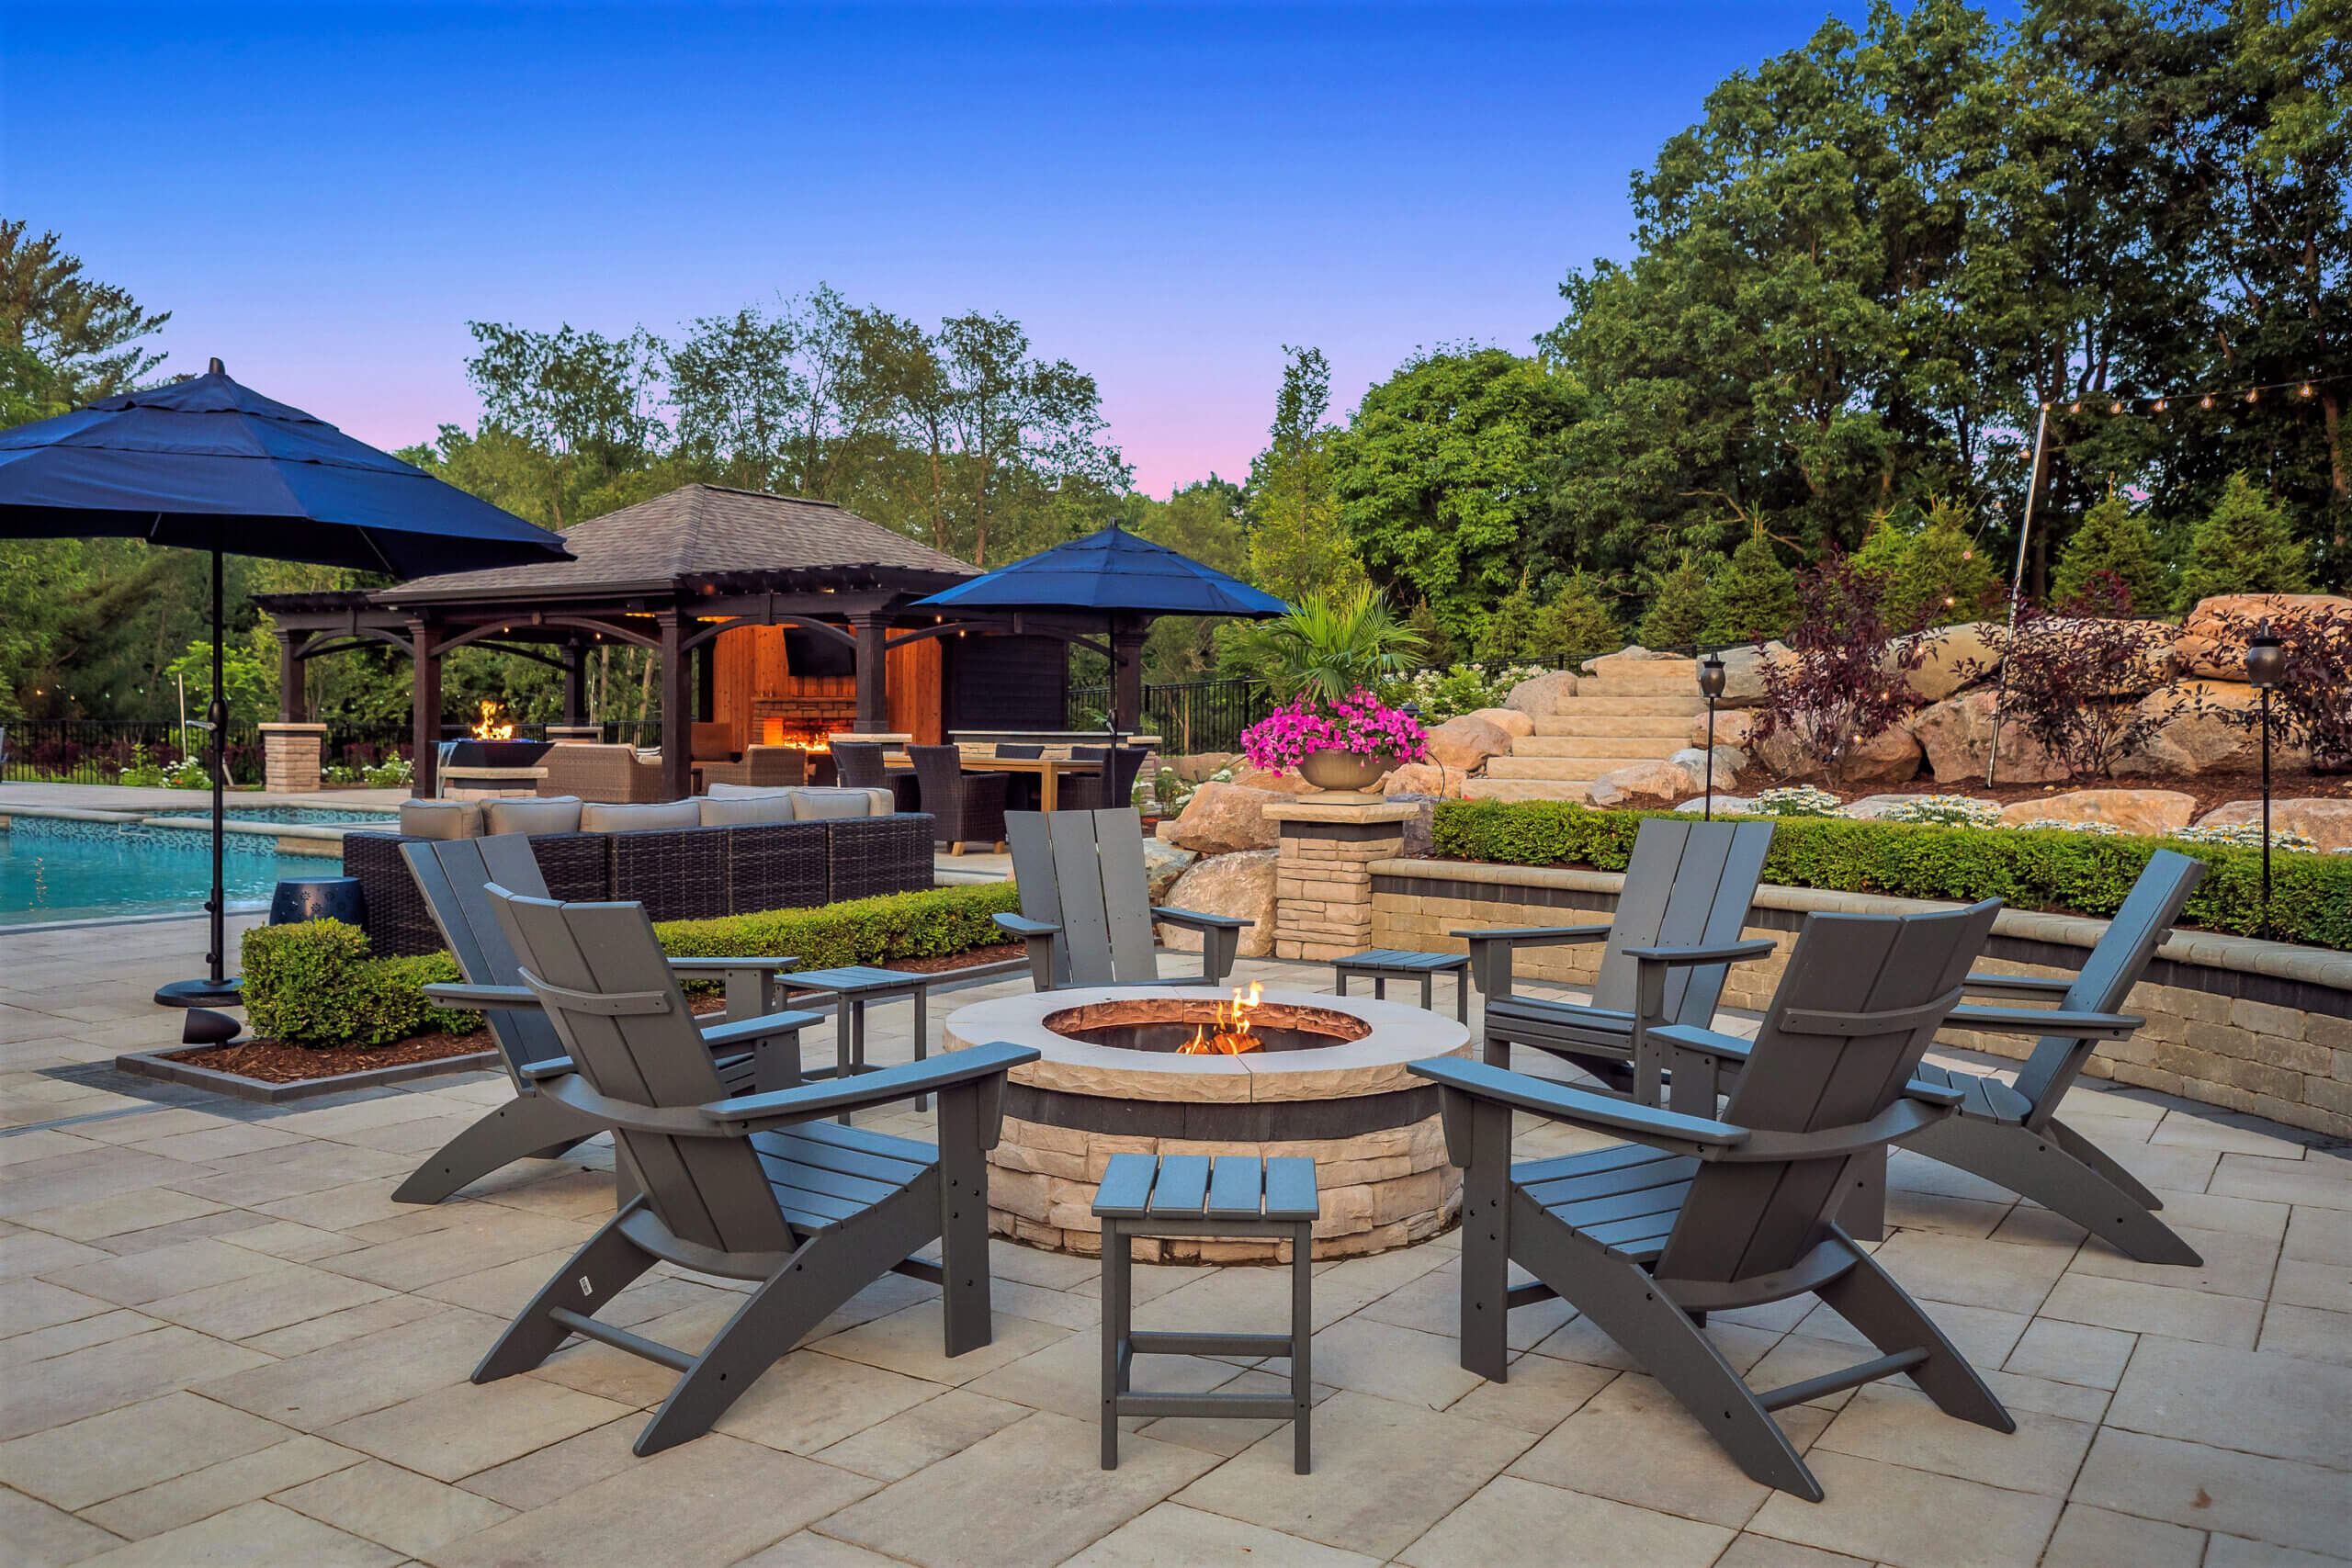 gunite pools, patio pavers, concrete paving, inground pools, pool and spa, fire bowls, patio covers in michigan, patio ideas, pool inspo, gazebos in michigan, cabanas in Michigan, backyard design, backyard landscape design, fire bowls, pool fountains, concrete builders, unilock, outdoor fireplaces in michigan, jacuzzi, outdoor hot tubs, pergola, gazebo, backyard ideas, patio design near me, fire glass, backyard ideas, landscape architecture, landscaping services, outdoor design inspo, cabana, fire pit, fire pits near me, brick paving, patio stones, patio steps